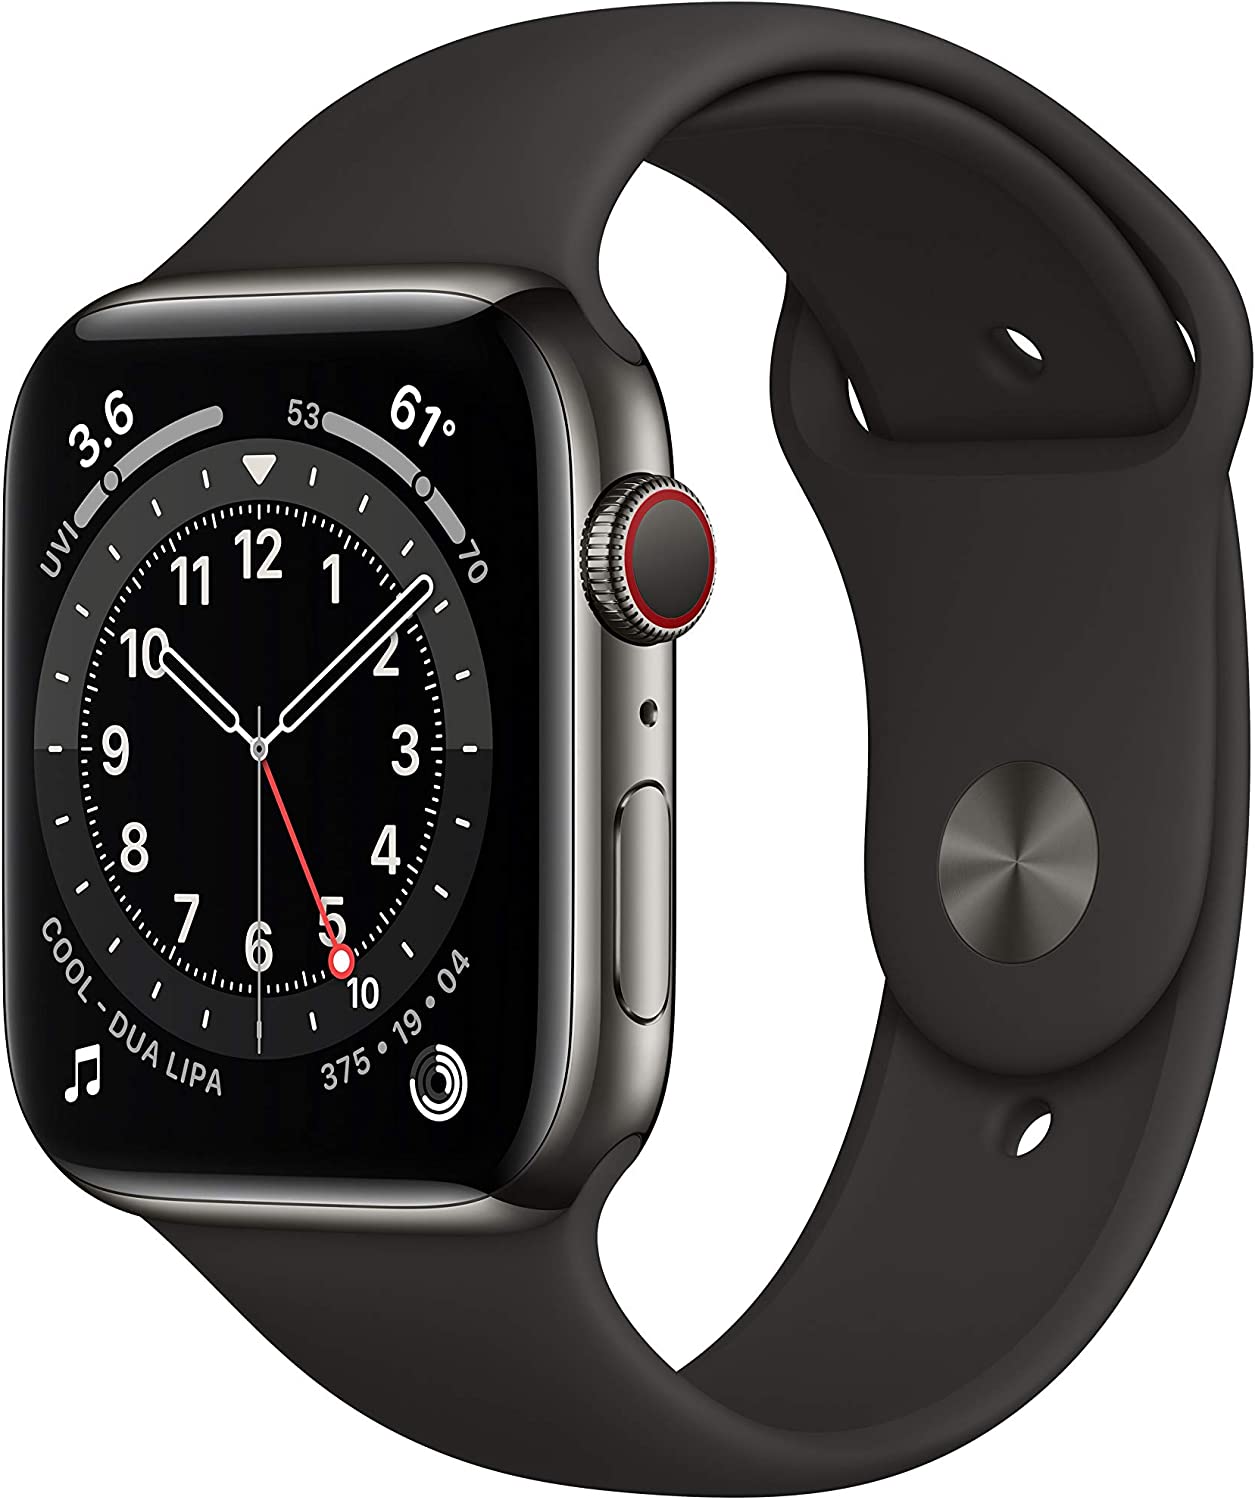 Apple Watch Series 6 (GPS + LTE) 44mm Graphite Stainless Steel Case &amp; Black Sport Band (Certified Refurbished)